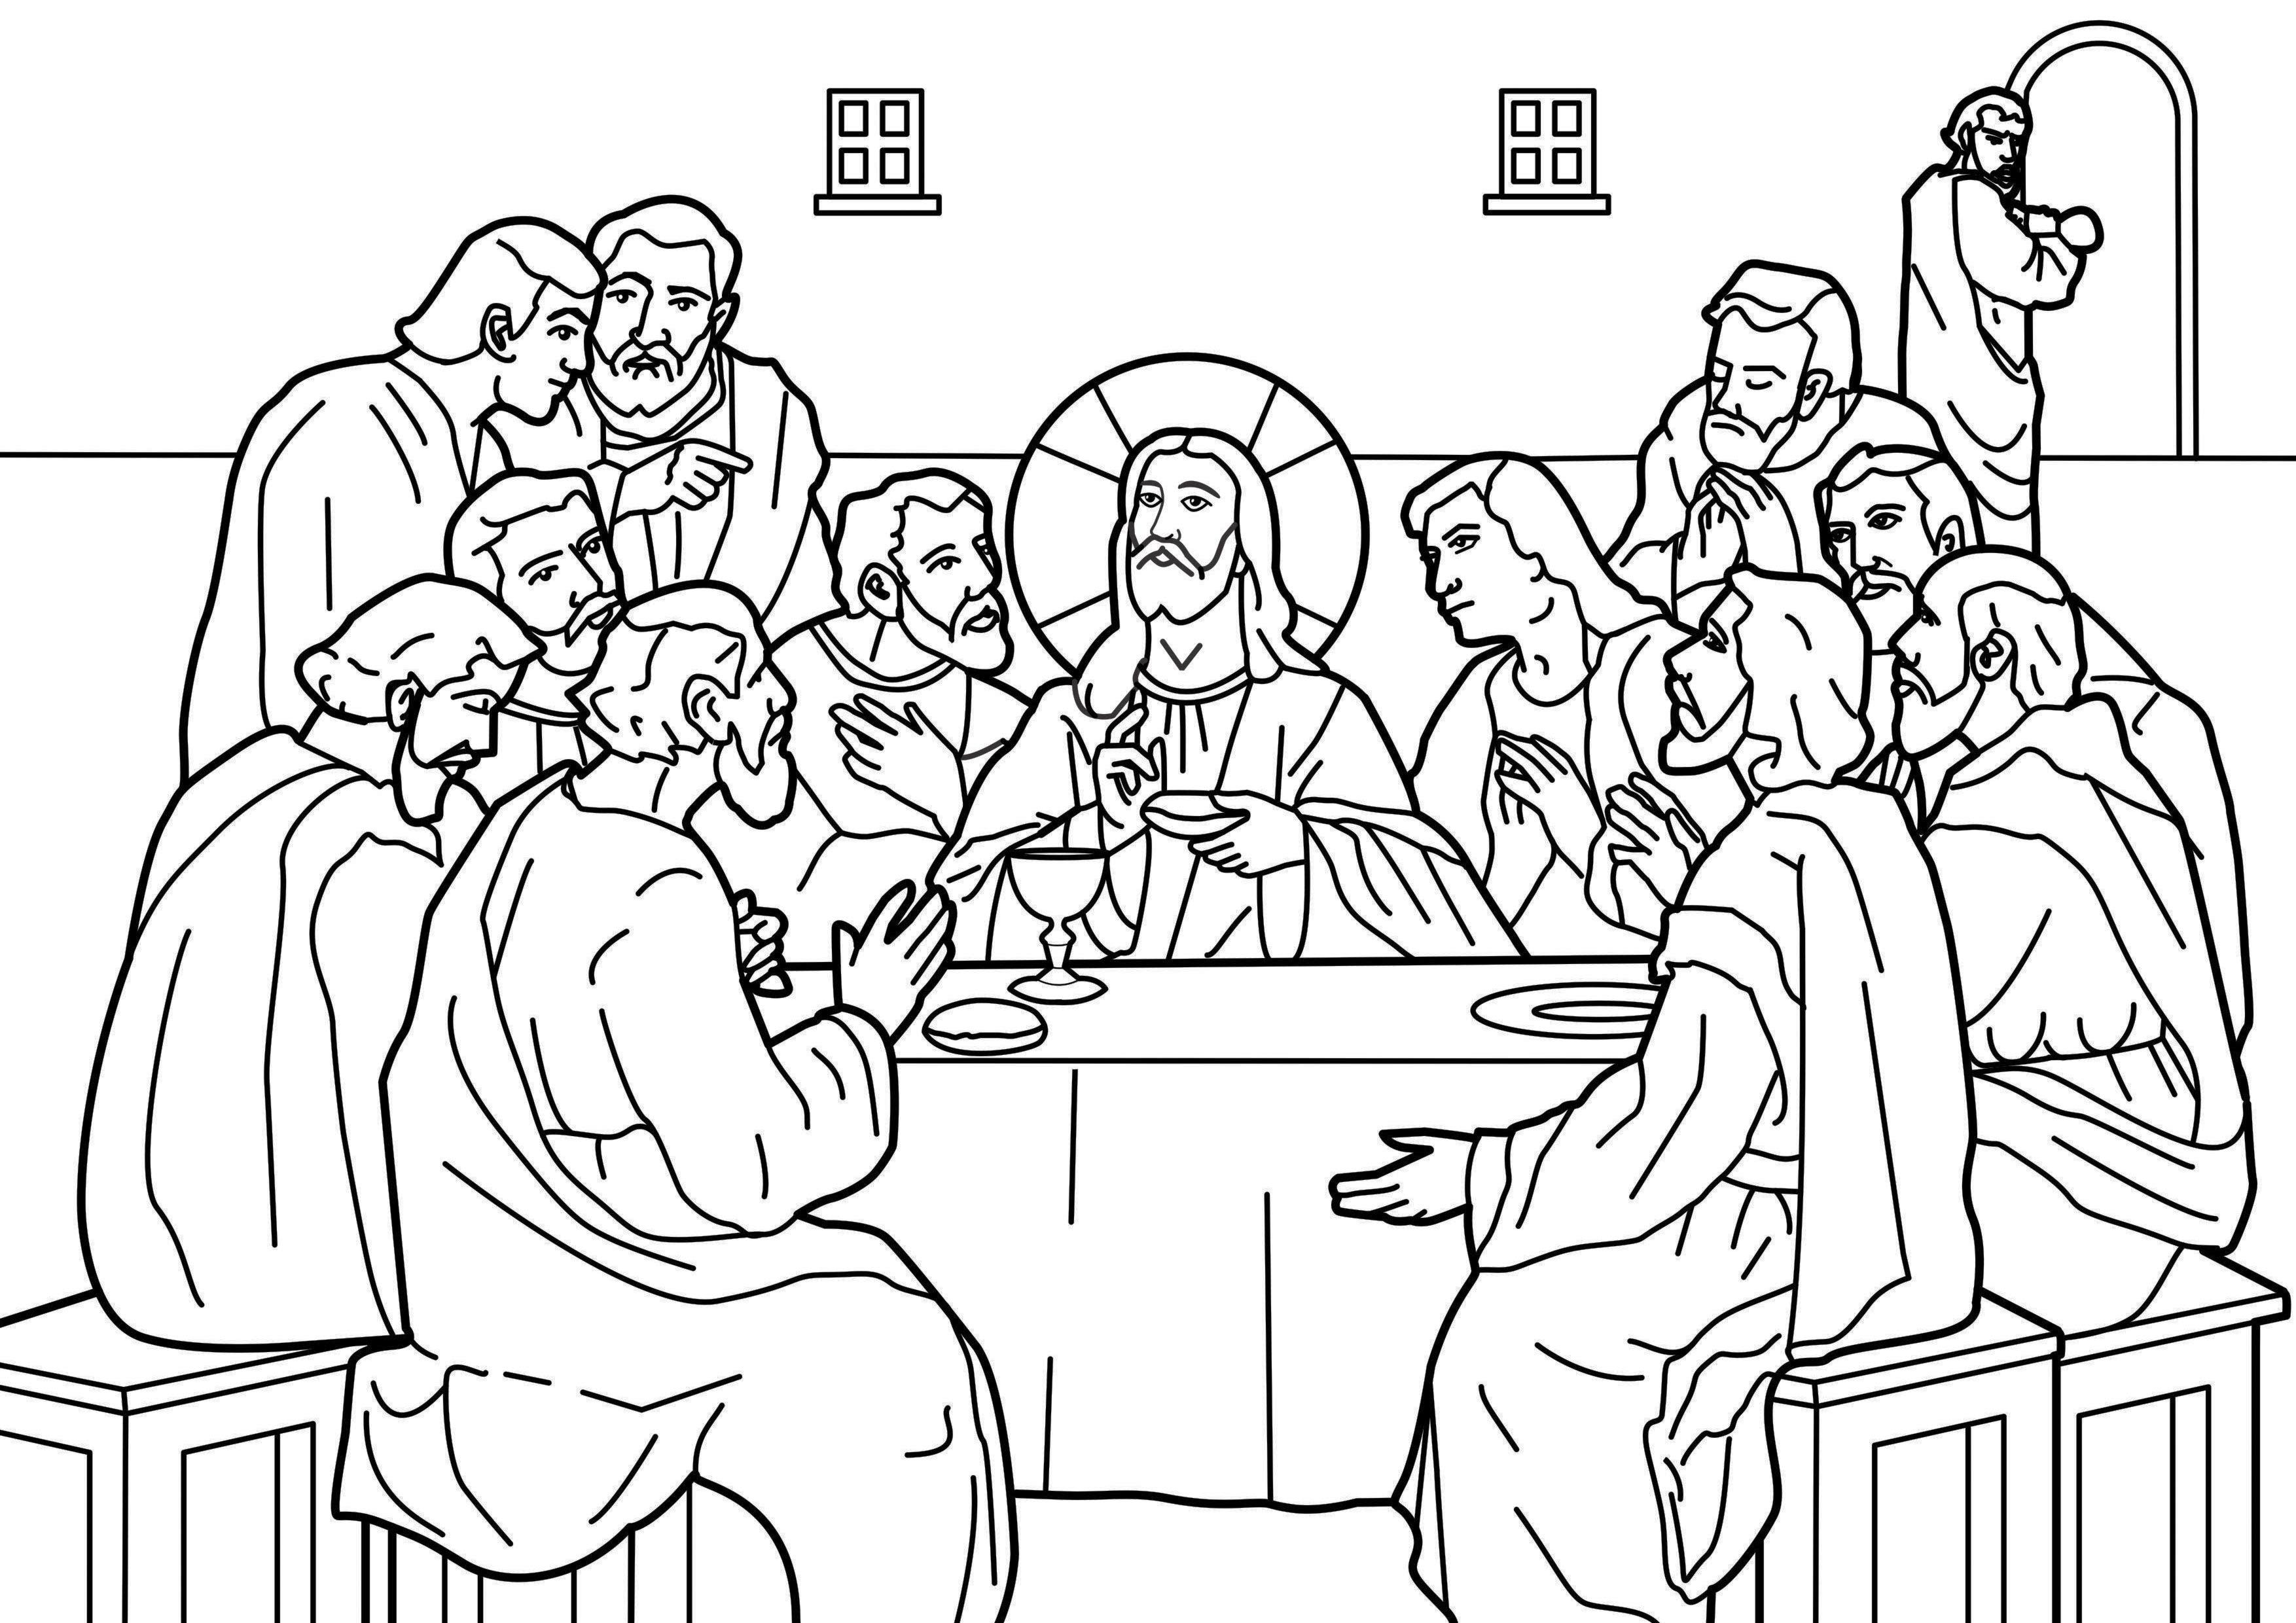 Garden of mary dedicated to our blessed mother the last supper coloring page